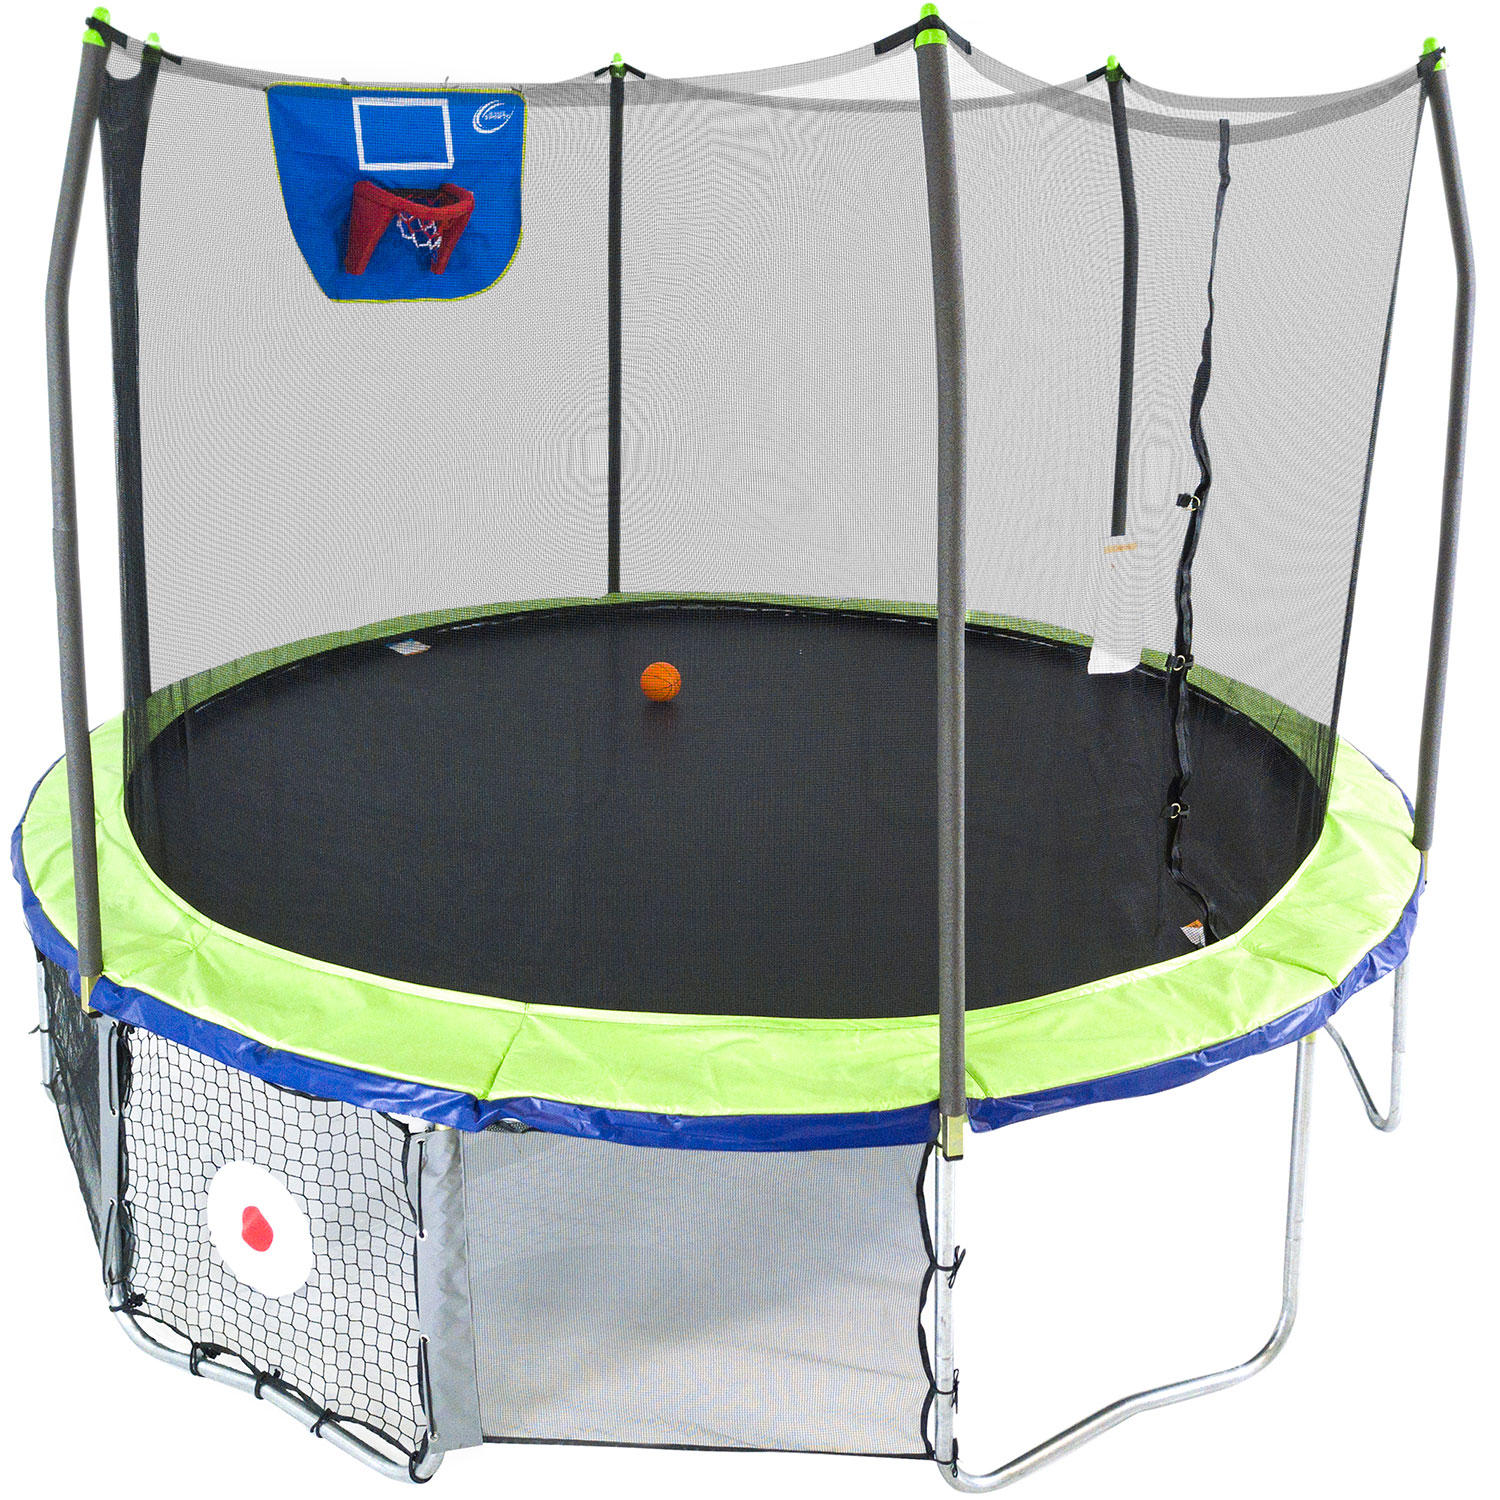 Skywalker Trampolines 12' Round Sports Arena Trampoline with Enclosure - Dual Color